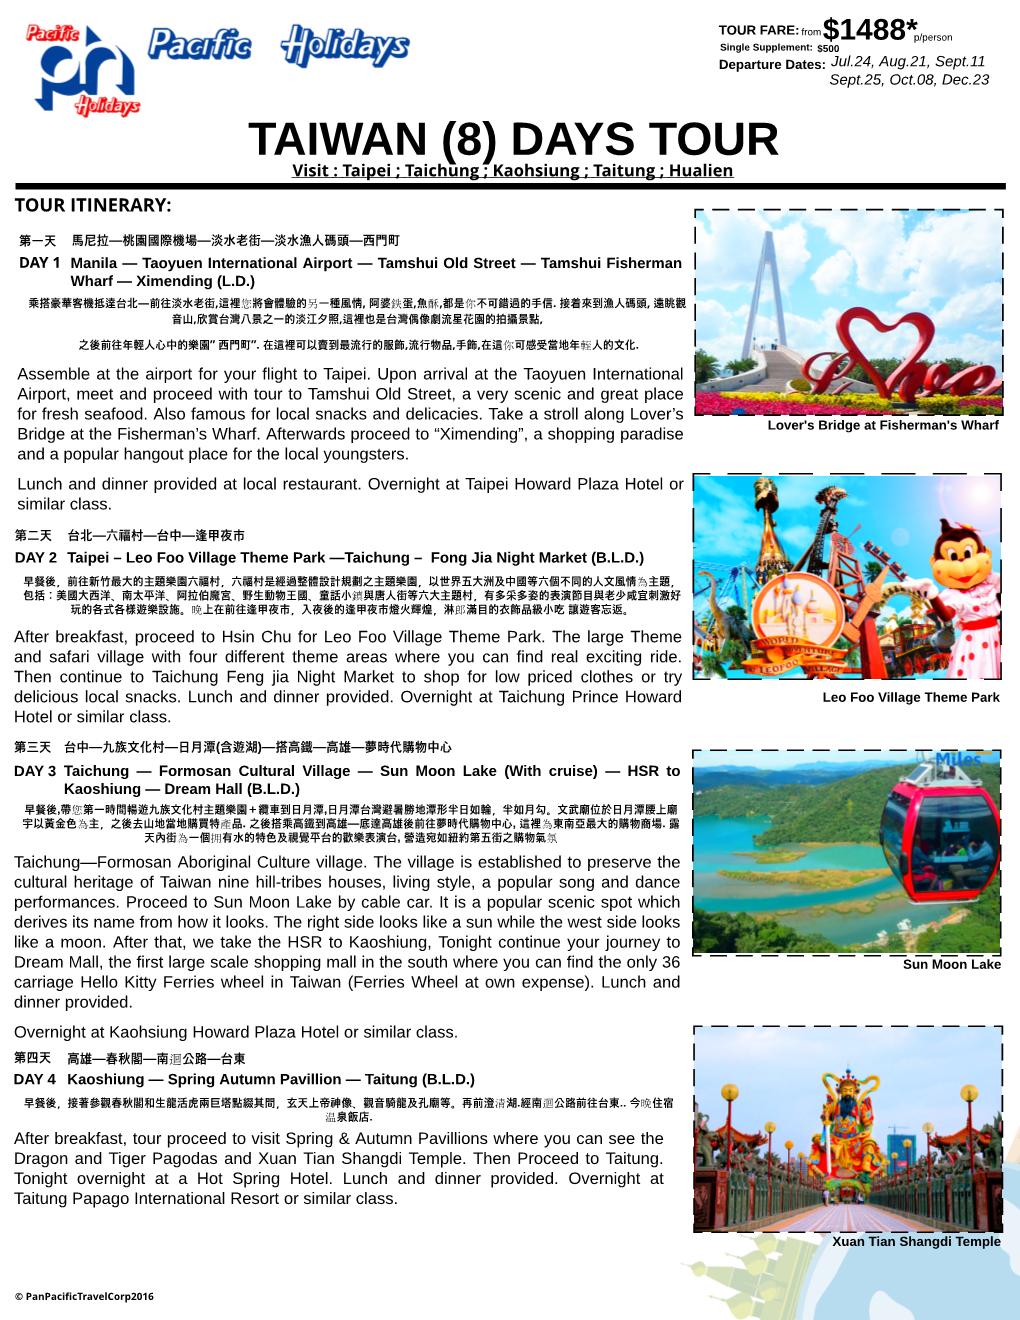 TAIWAN (8) DAYS TOUR Visit : Taipei ; Taichung ; Kaohsiung ; Tait Ung ; Hualien TOUR ITINERARY